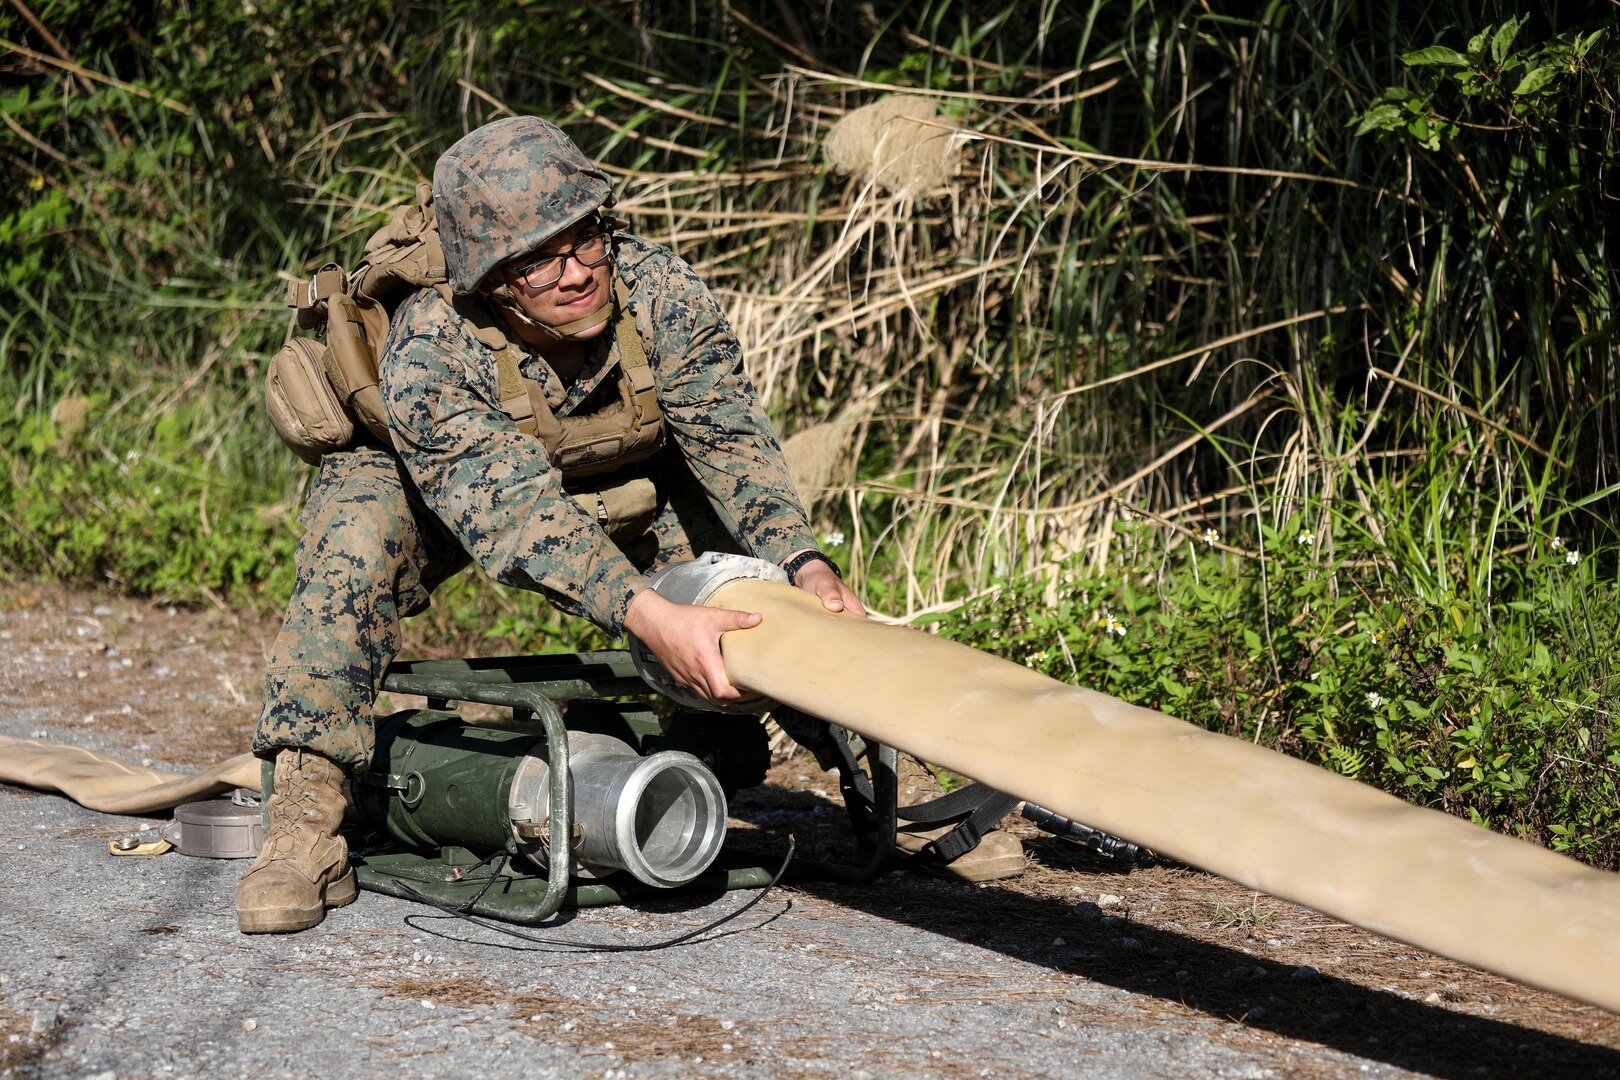 Pfc. Gilberto Loza-Machado pulls on a fuel hose to be attached to a meter on Jan. 28, 2019 at Central Training Area, Camp Hansen, Okinawa, Japan. Marines with 2nd Platoon, Bulk Fuel Company, 9th Engineer Support Battalion, 3rd Marine Logistics Group, assembled several fuel sites across the CTA to enhance their training and readiness within a harsh environment. The Marines set up and maintained their bulk fuel equipment during a week-long training evolution. Loza-Machado, a native of San Bernardino, California, is a bulk fuel specialist with 2nd Plt., Bulk Fuel Co., 9th ESB, 3rd MLG. (U.S. Marine Corps photo by Lance Cpl. Armando Elizalde)